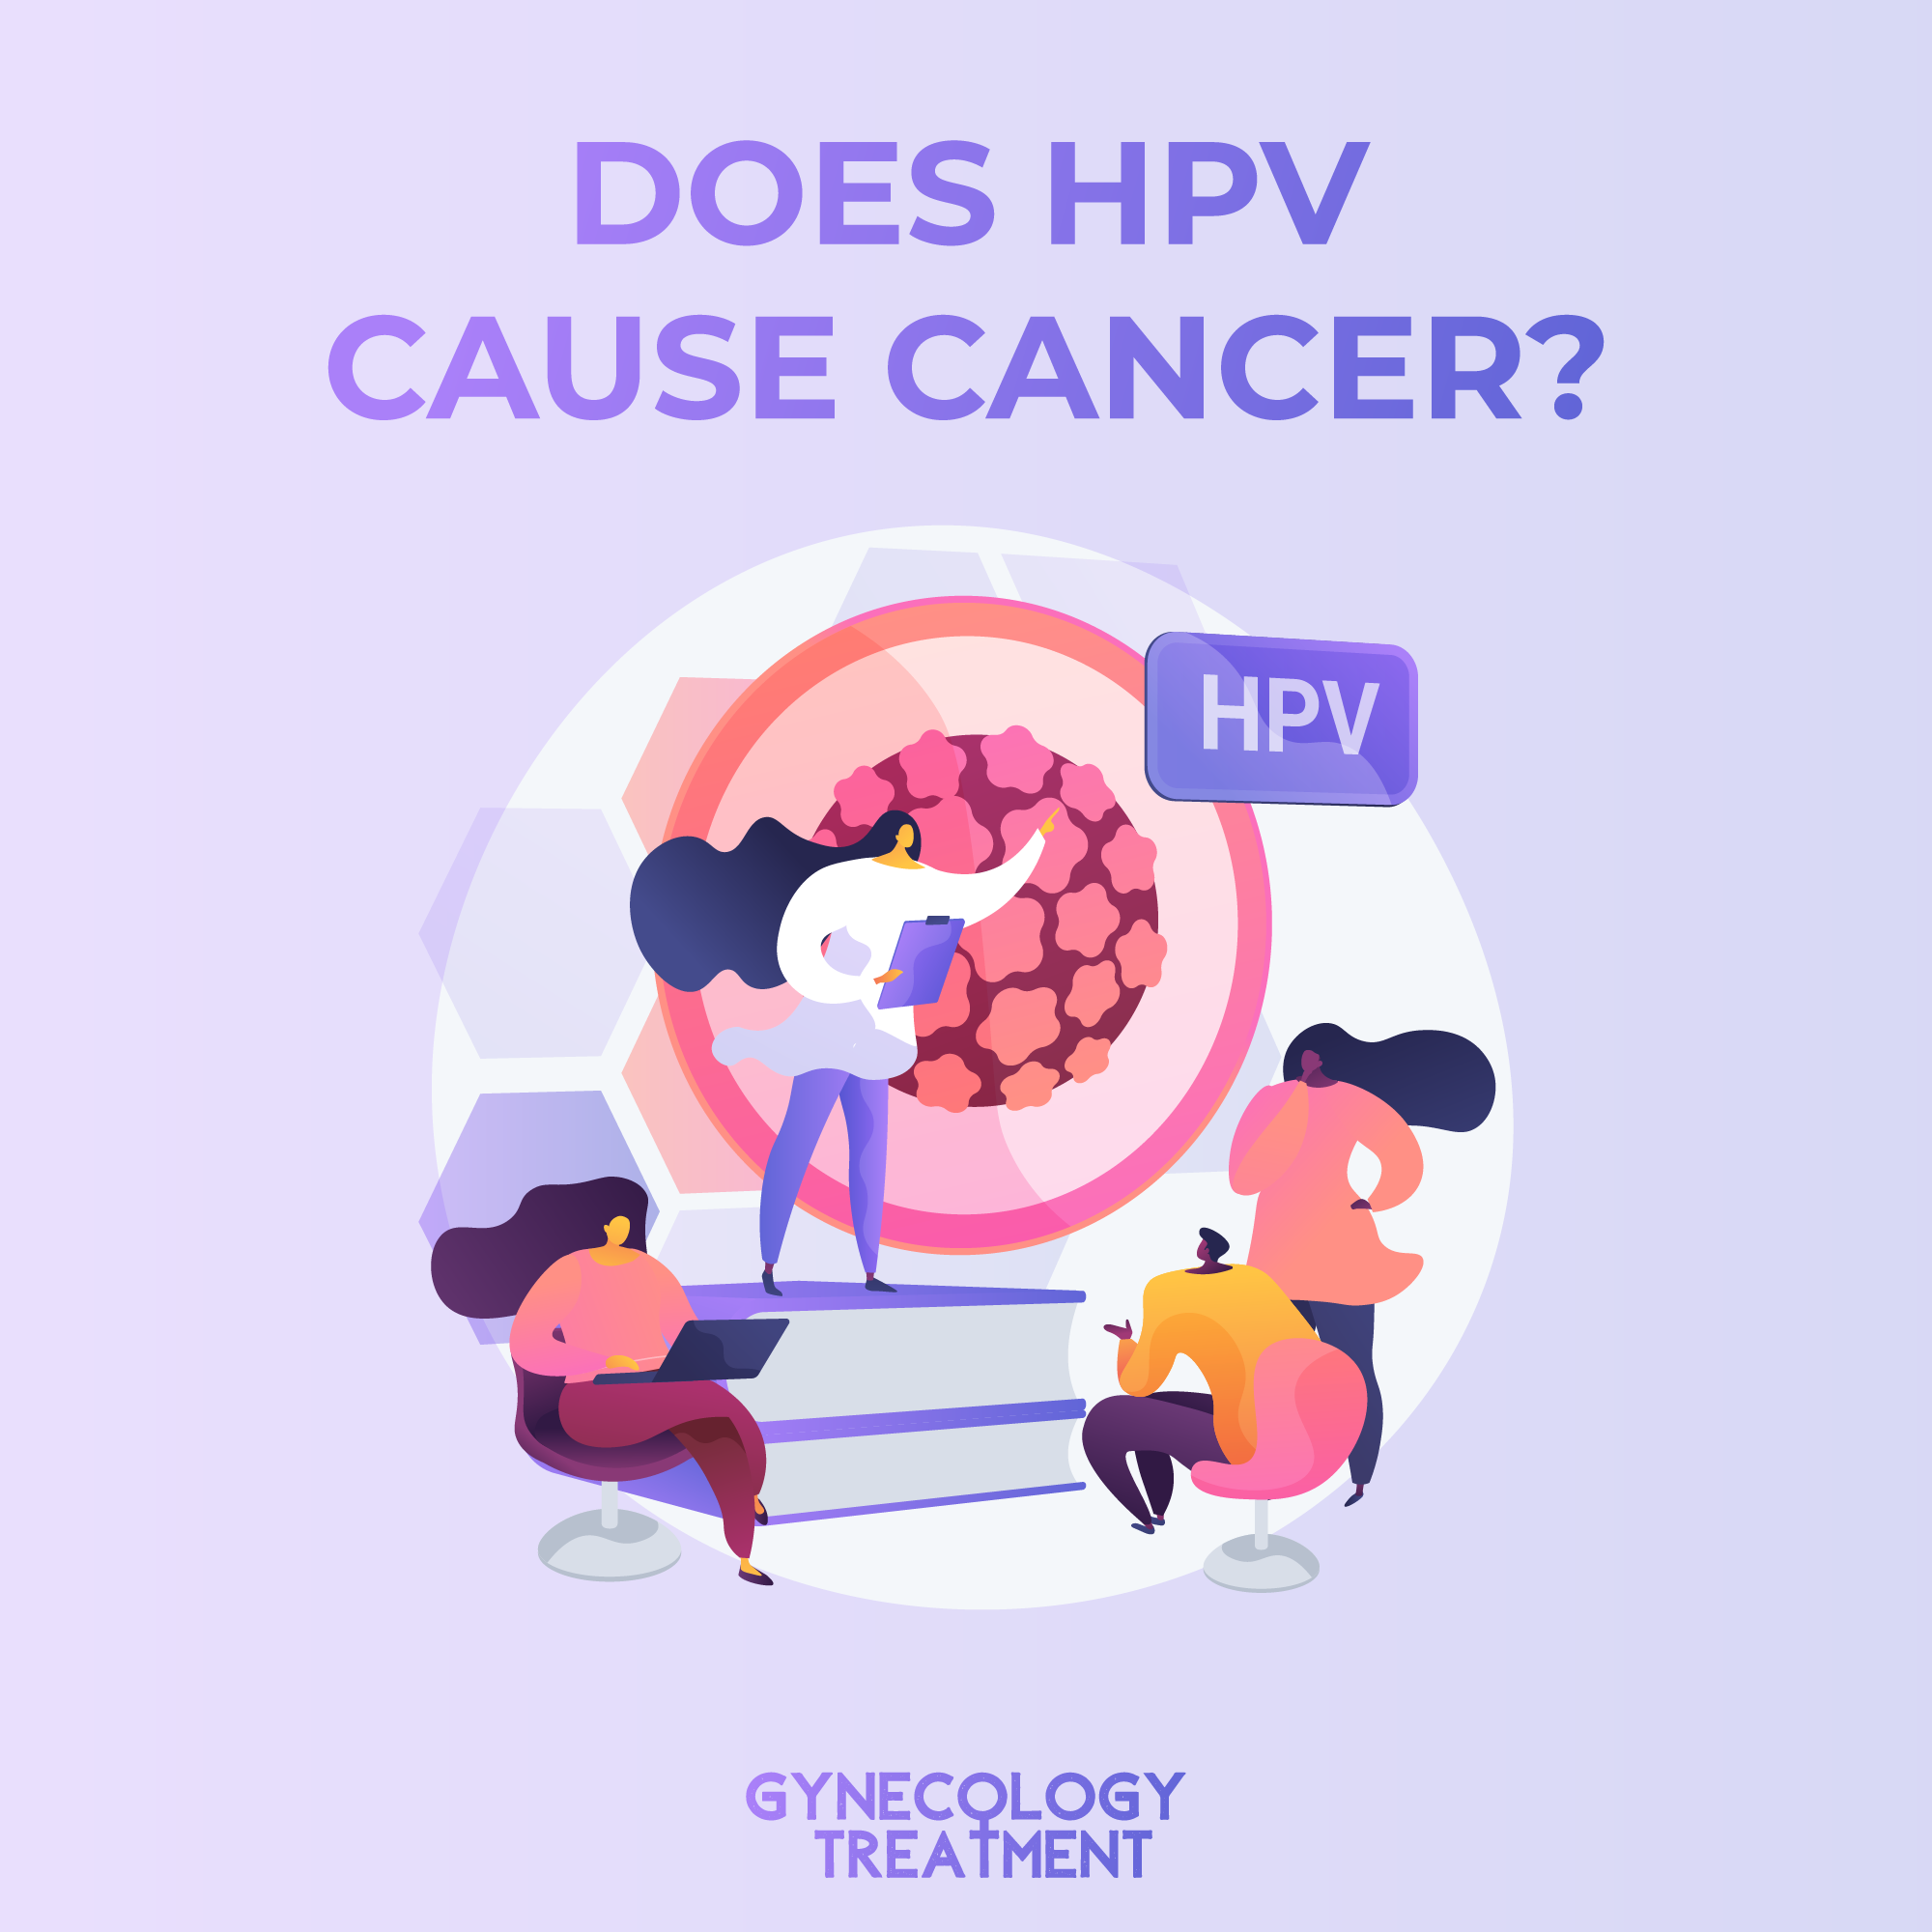 Does HPV cause cancer?